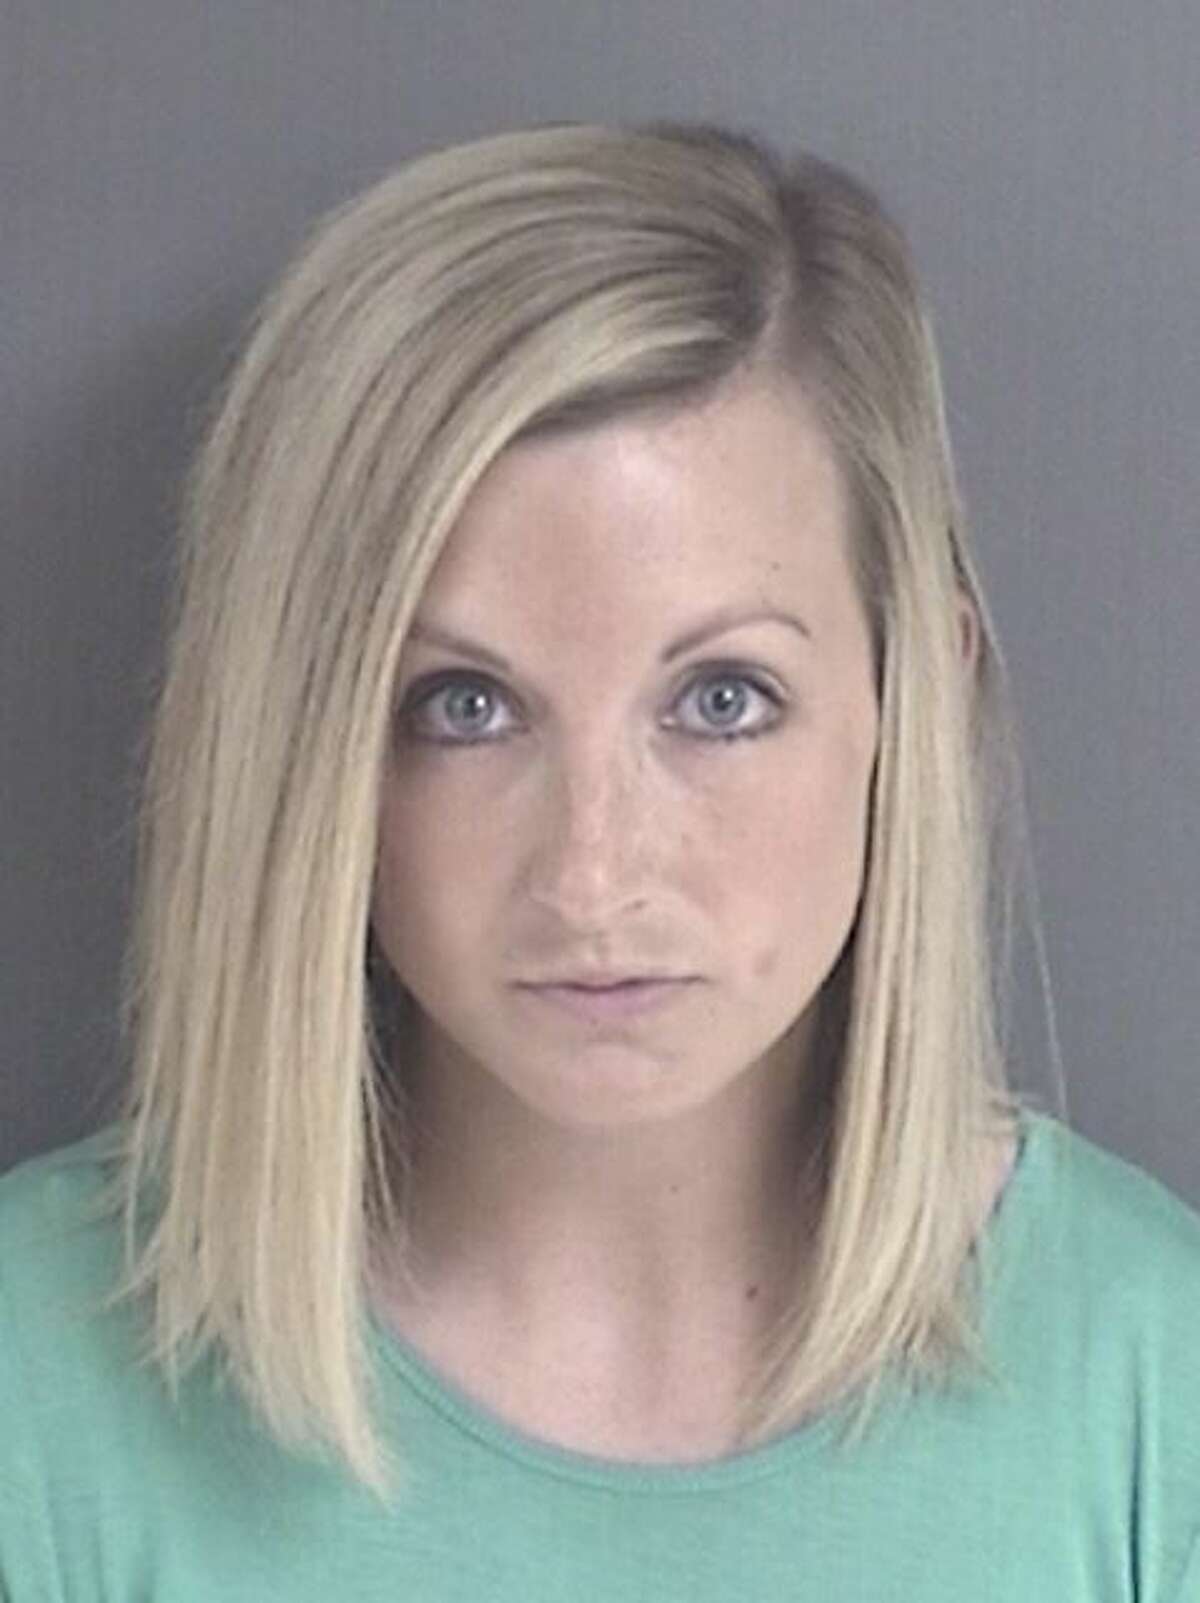 Nude Student Teacher Sex Scandals - Police: East Texas middle school teacher sent nude photos to 14-year-old  student on Snapchat